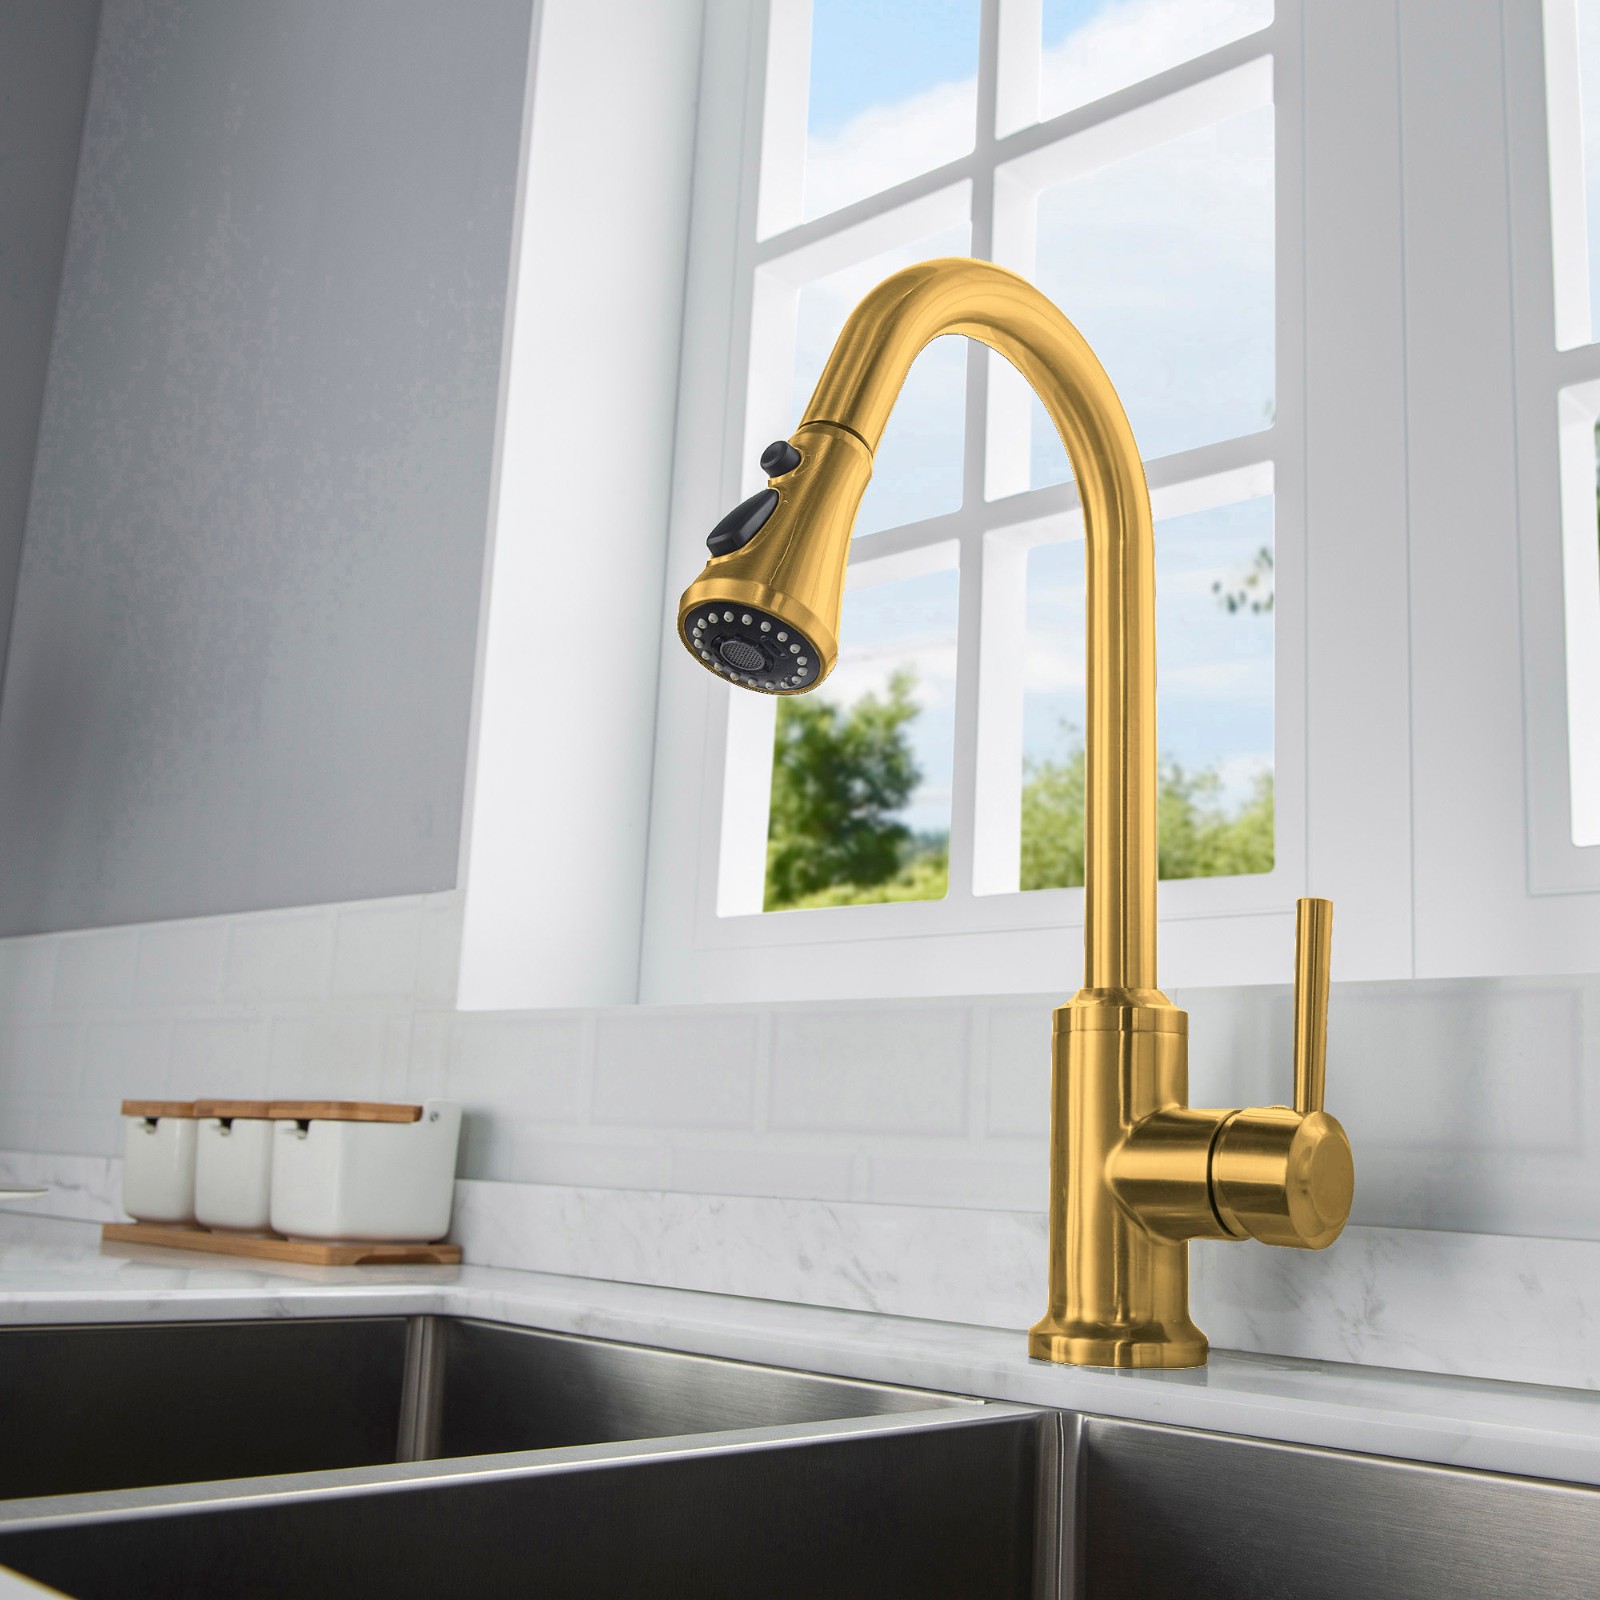  WOODBRIDGE WK101201BG Stainless Steel Single Handle Pull Down Kitchen Faucet in Brushed Gold Finish._5002